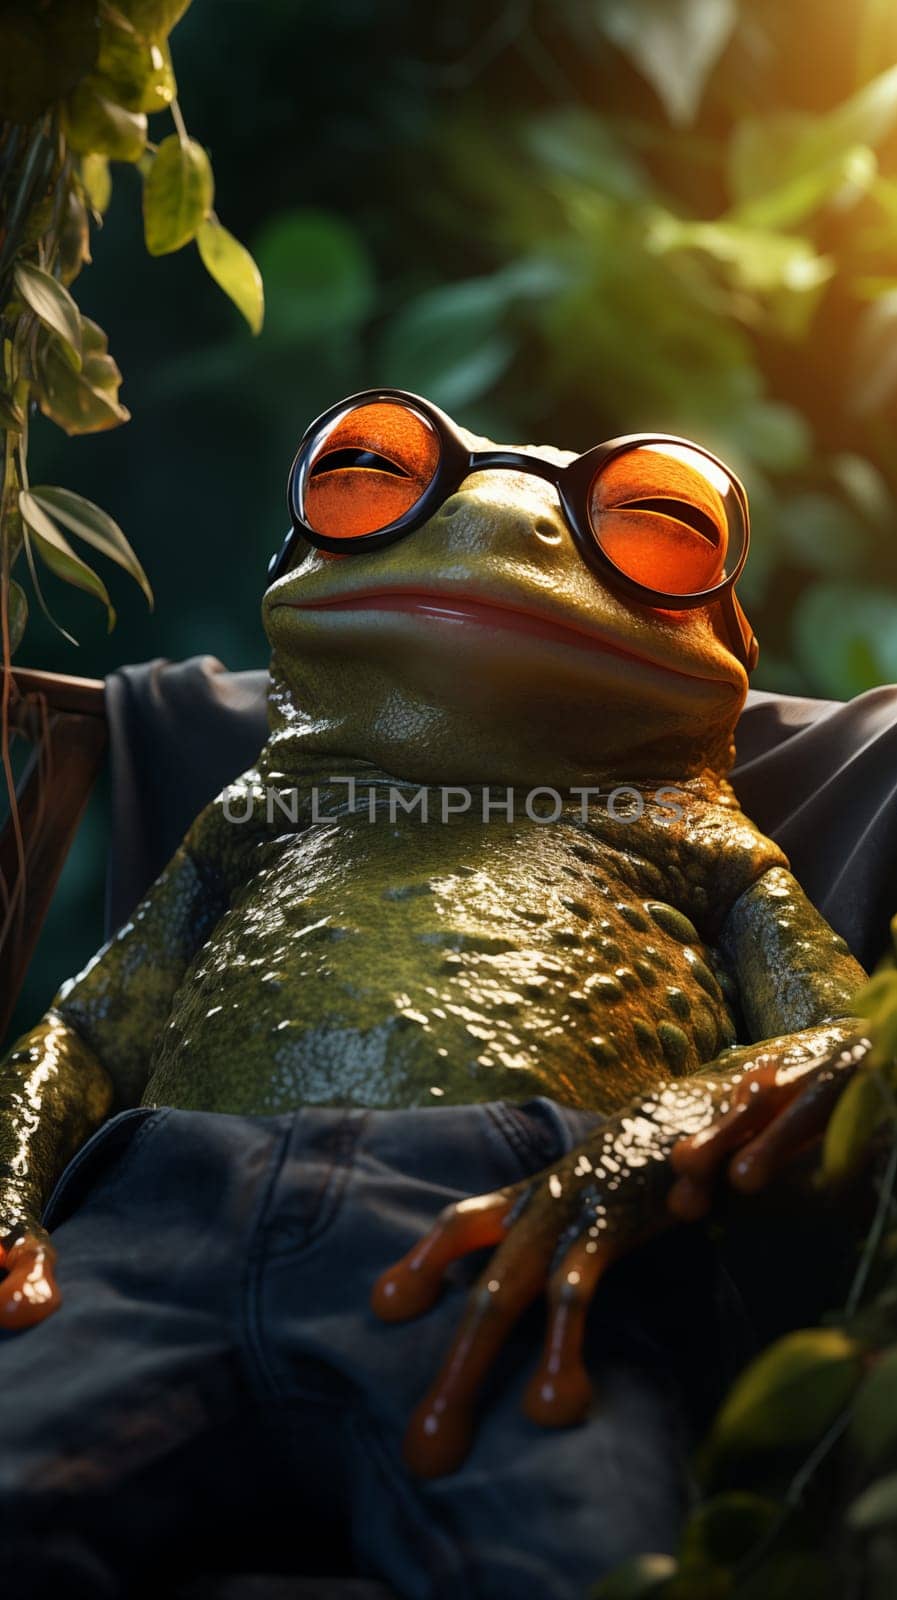 Stylish Frog Lounging in Sunglasses relaxed in a chair amidst foliage.